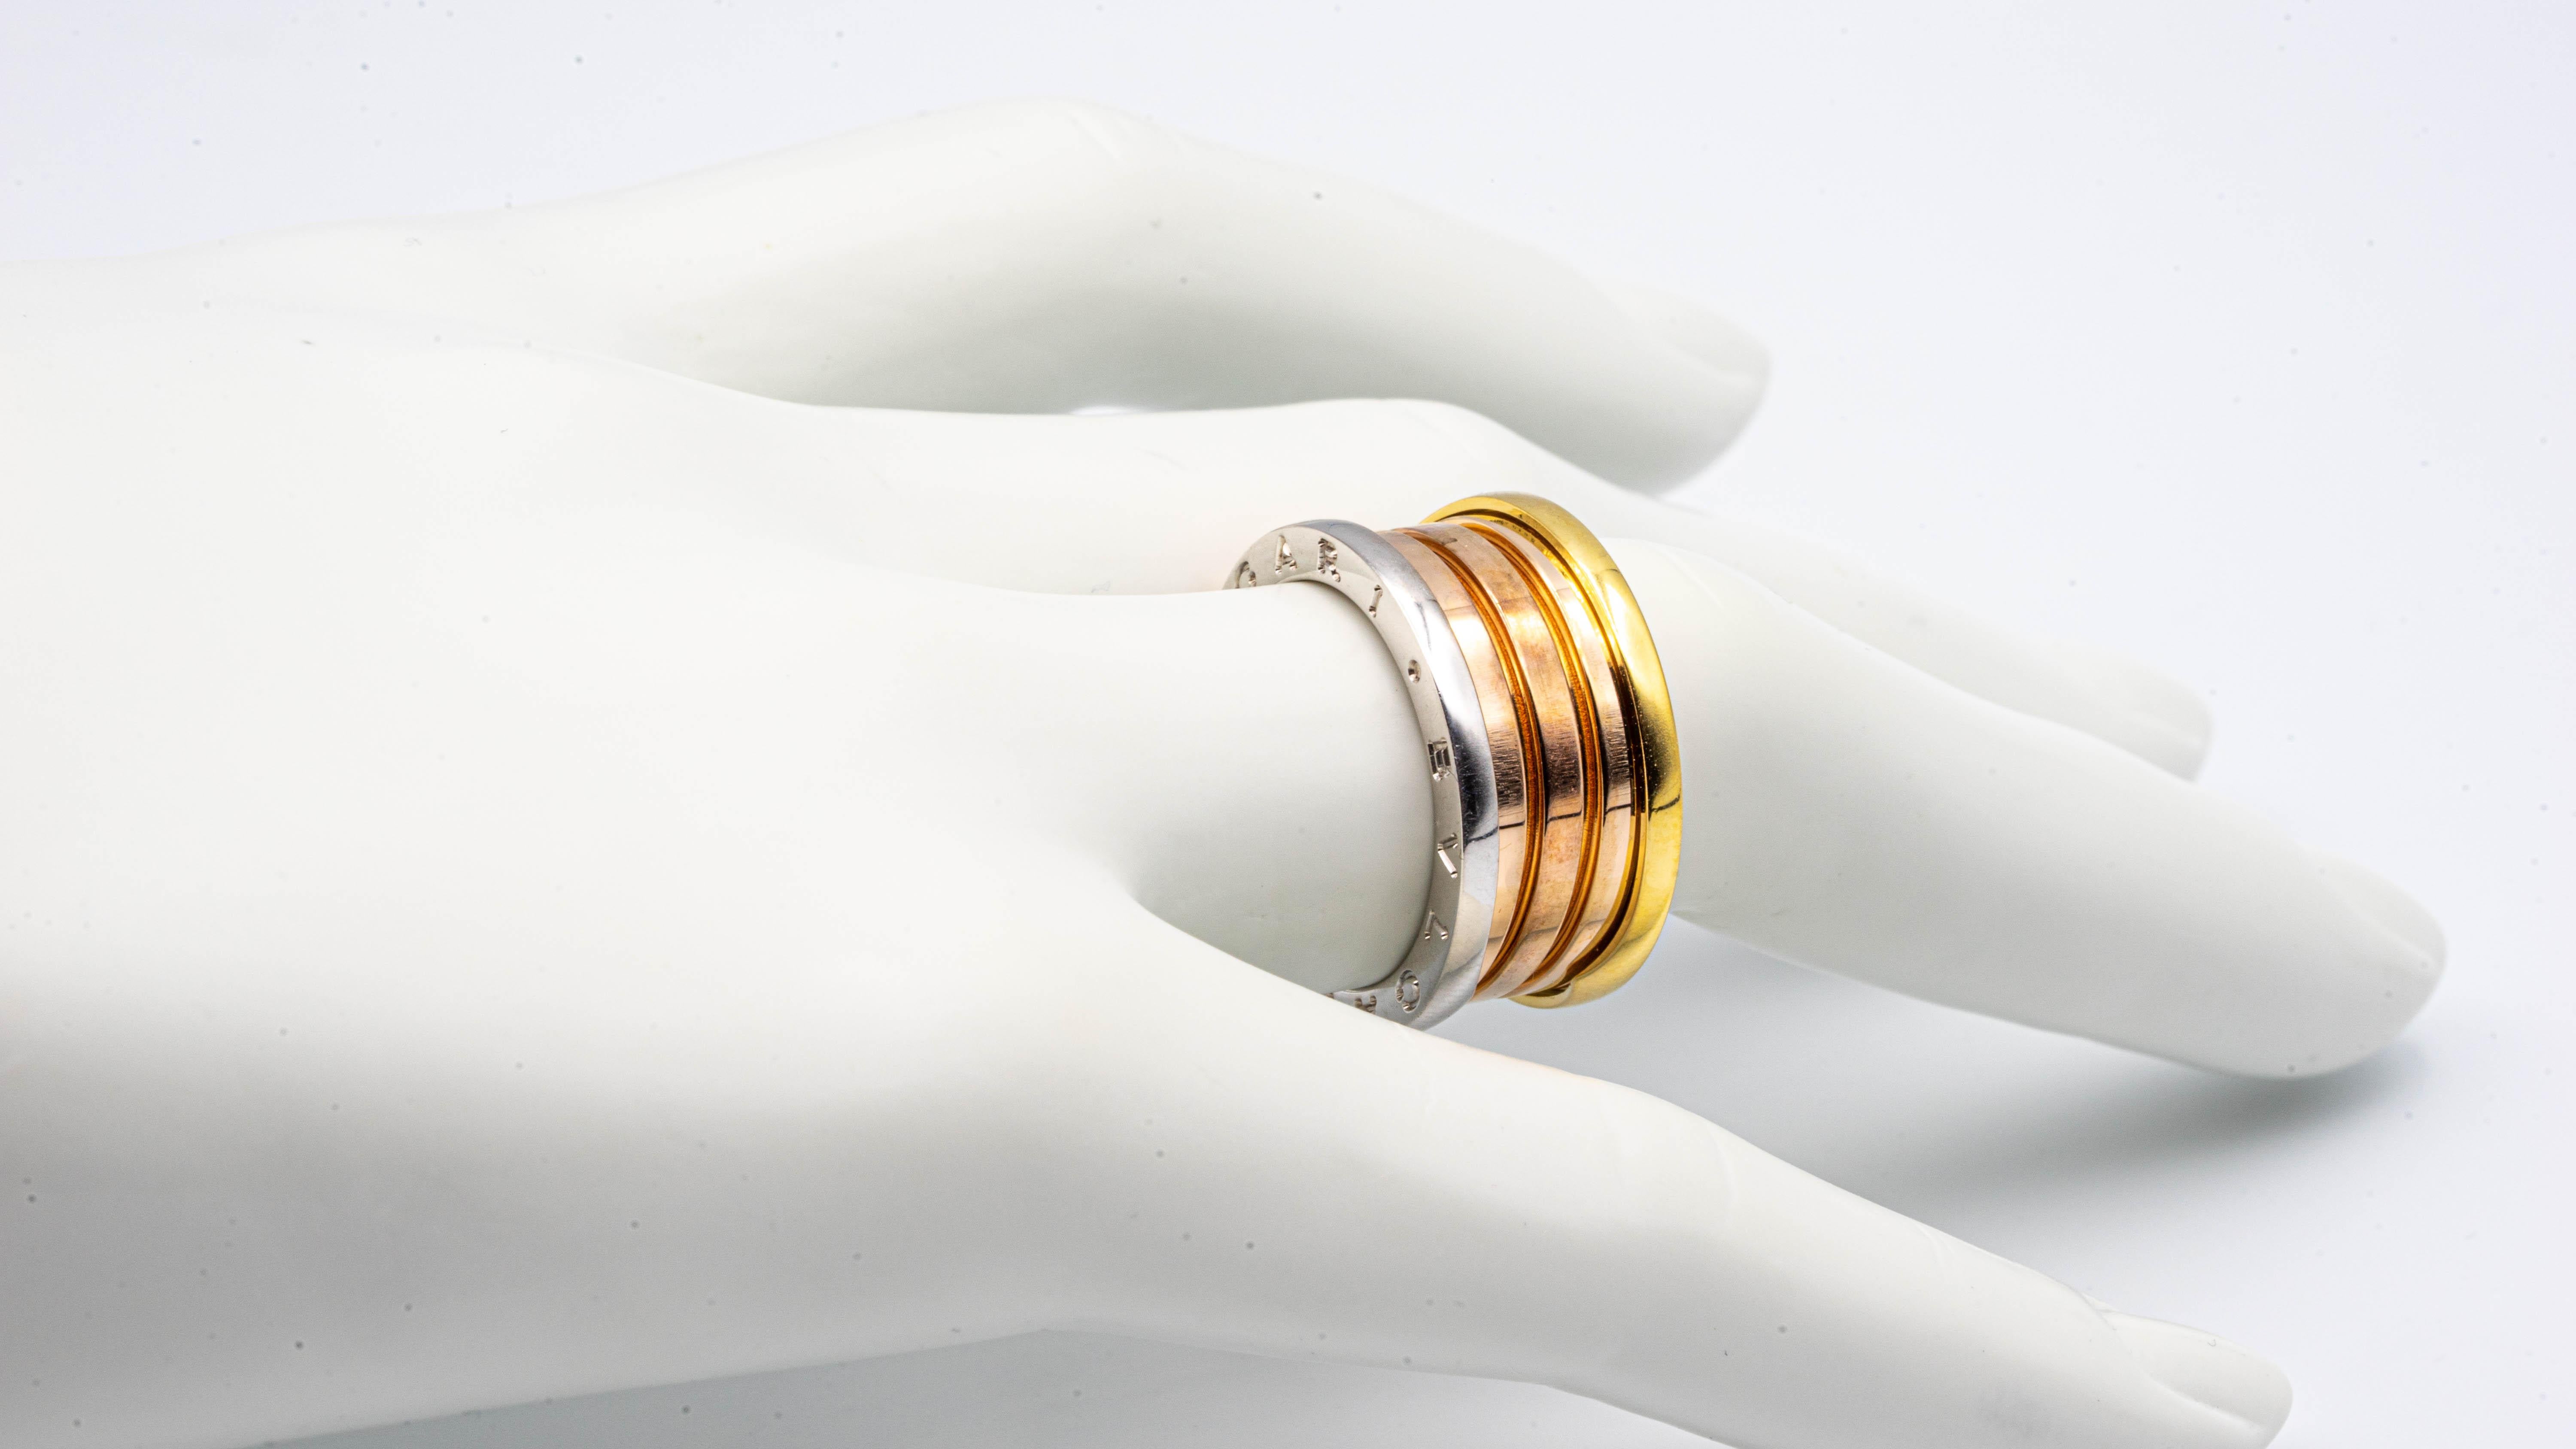 Stylish Bvlgari Ring from the B-Zero Collection finely crafted in 18 karat gold with a combination of 4 bands in white, yellow and rose gold. The ring is stamped 56 Euro size which equals 7.5 US size. Made in Italy
Original Box Included

Stamp: